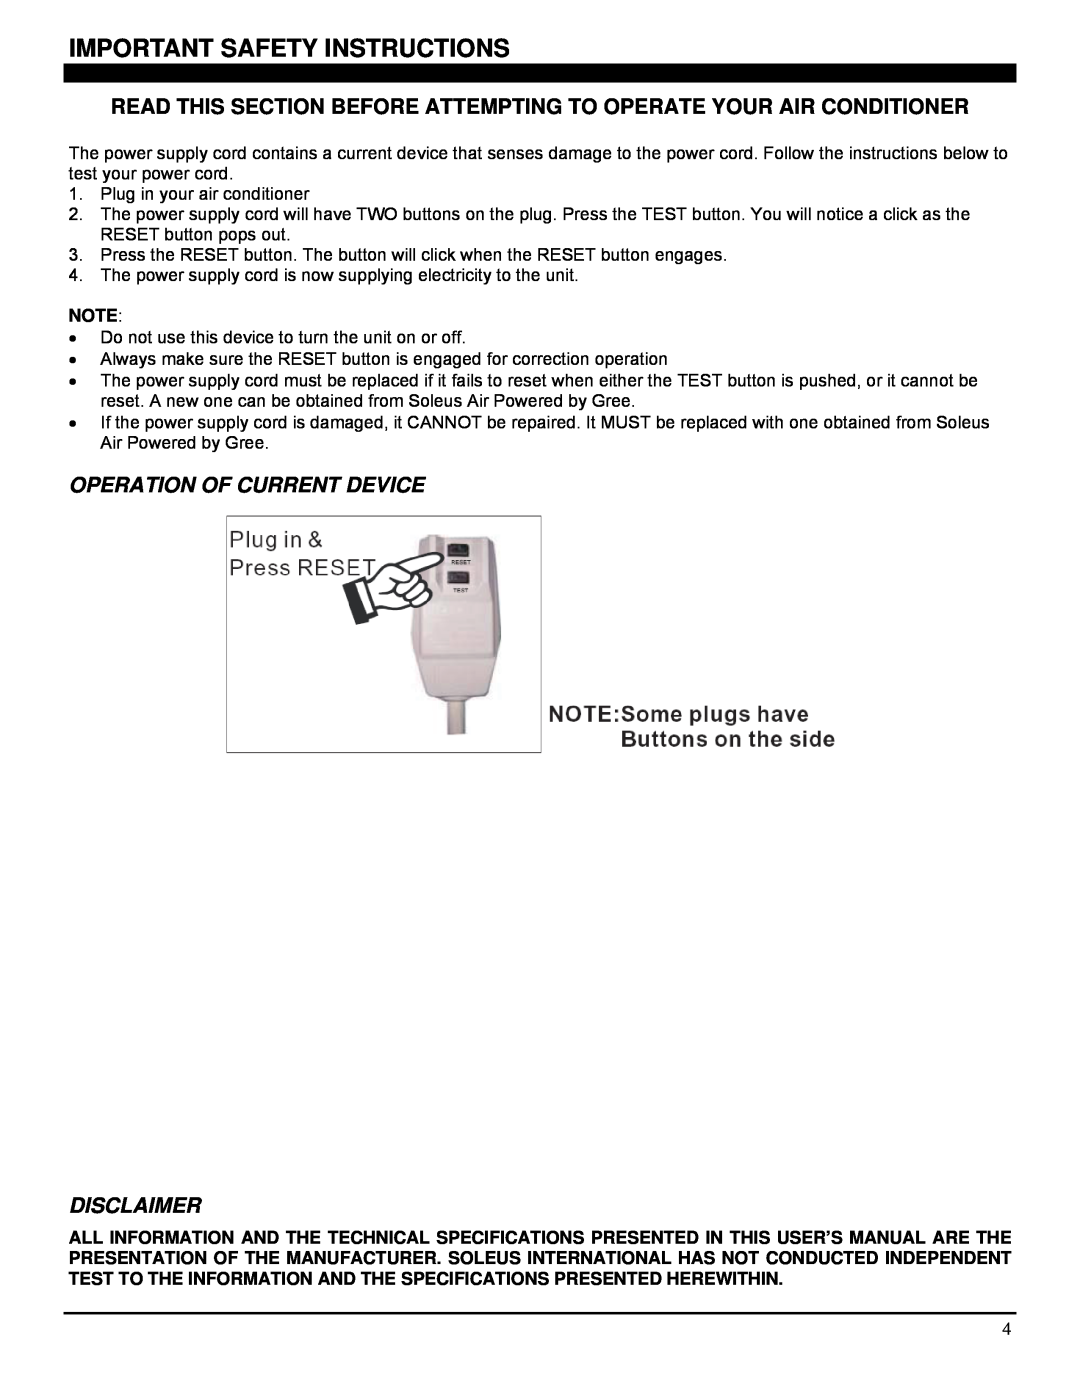 Soleus Air SG-TTW-10ESE Important Safety Instructions, Read This Section Before Attempting To Operate Your Air Conditioner 